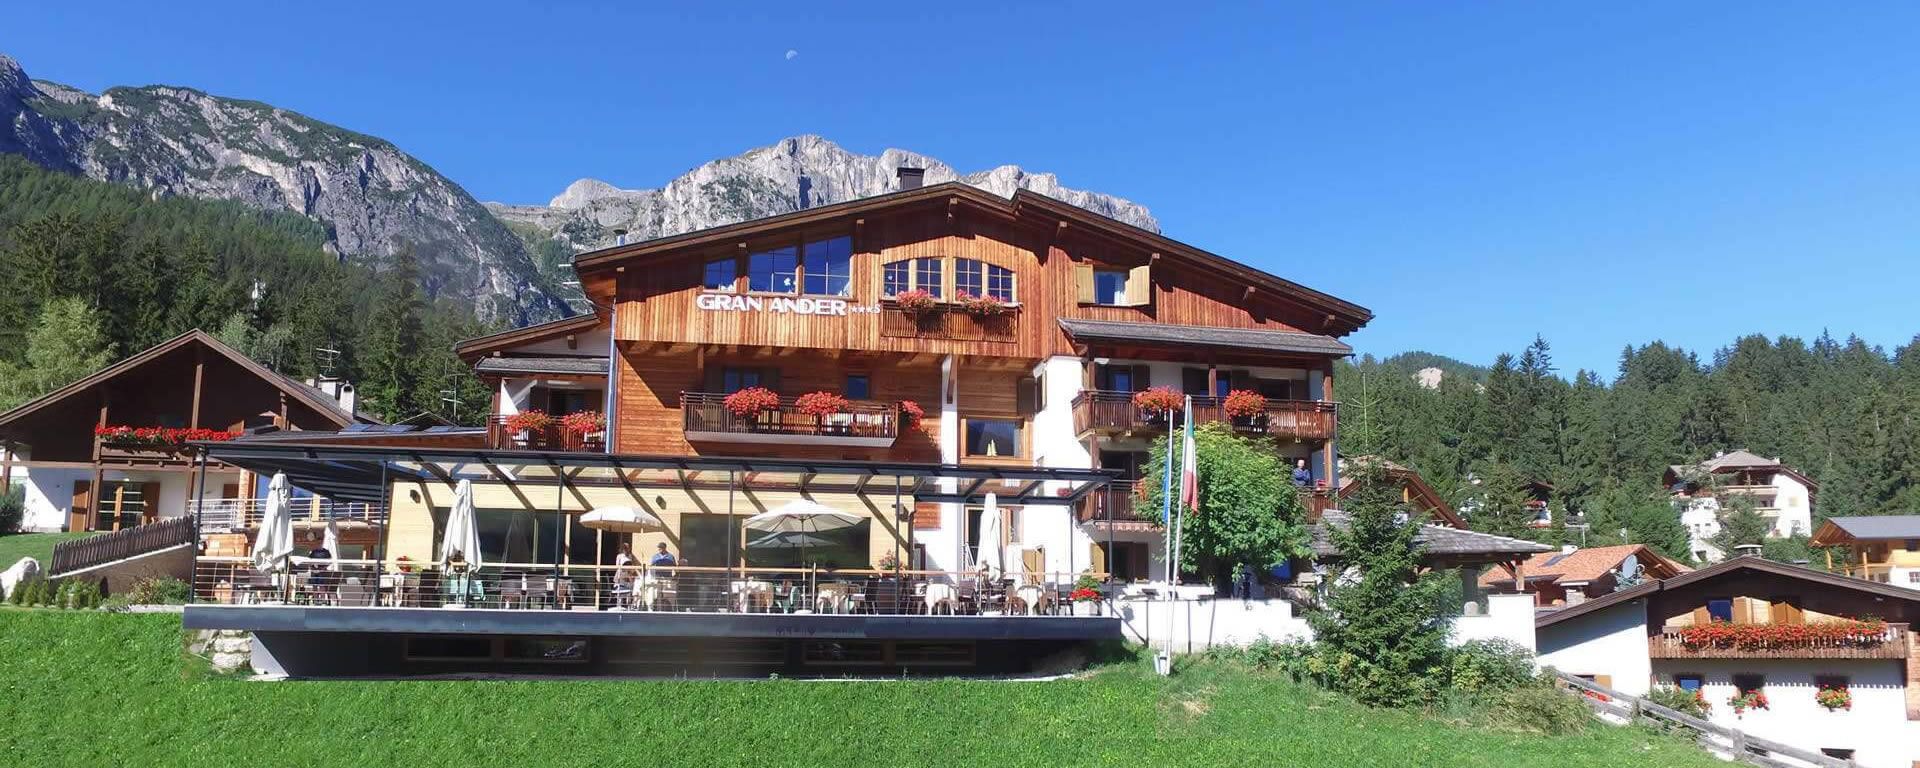 The hotel in our Ultimate Dolomites Trip